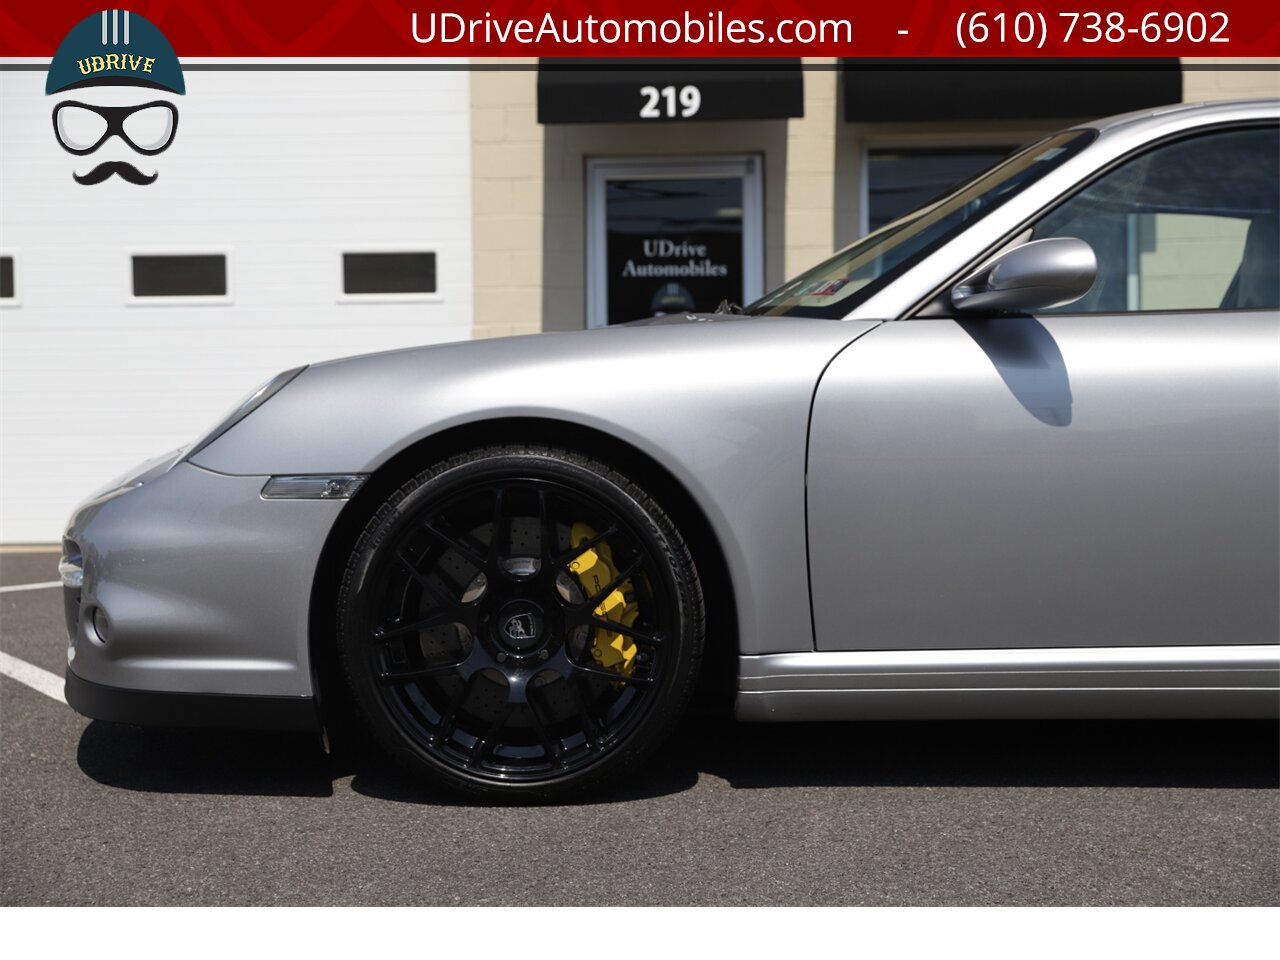 2008 Porsche 911 6 Speed Manual Turbo 997 PCCB's $149k MSRP   - Photo 8 - West Chester, PA 19382